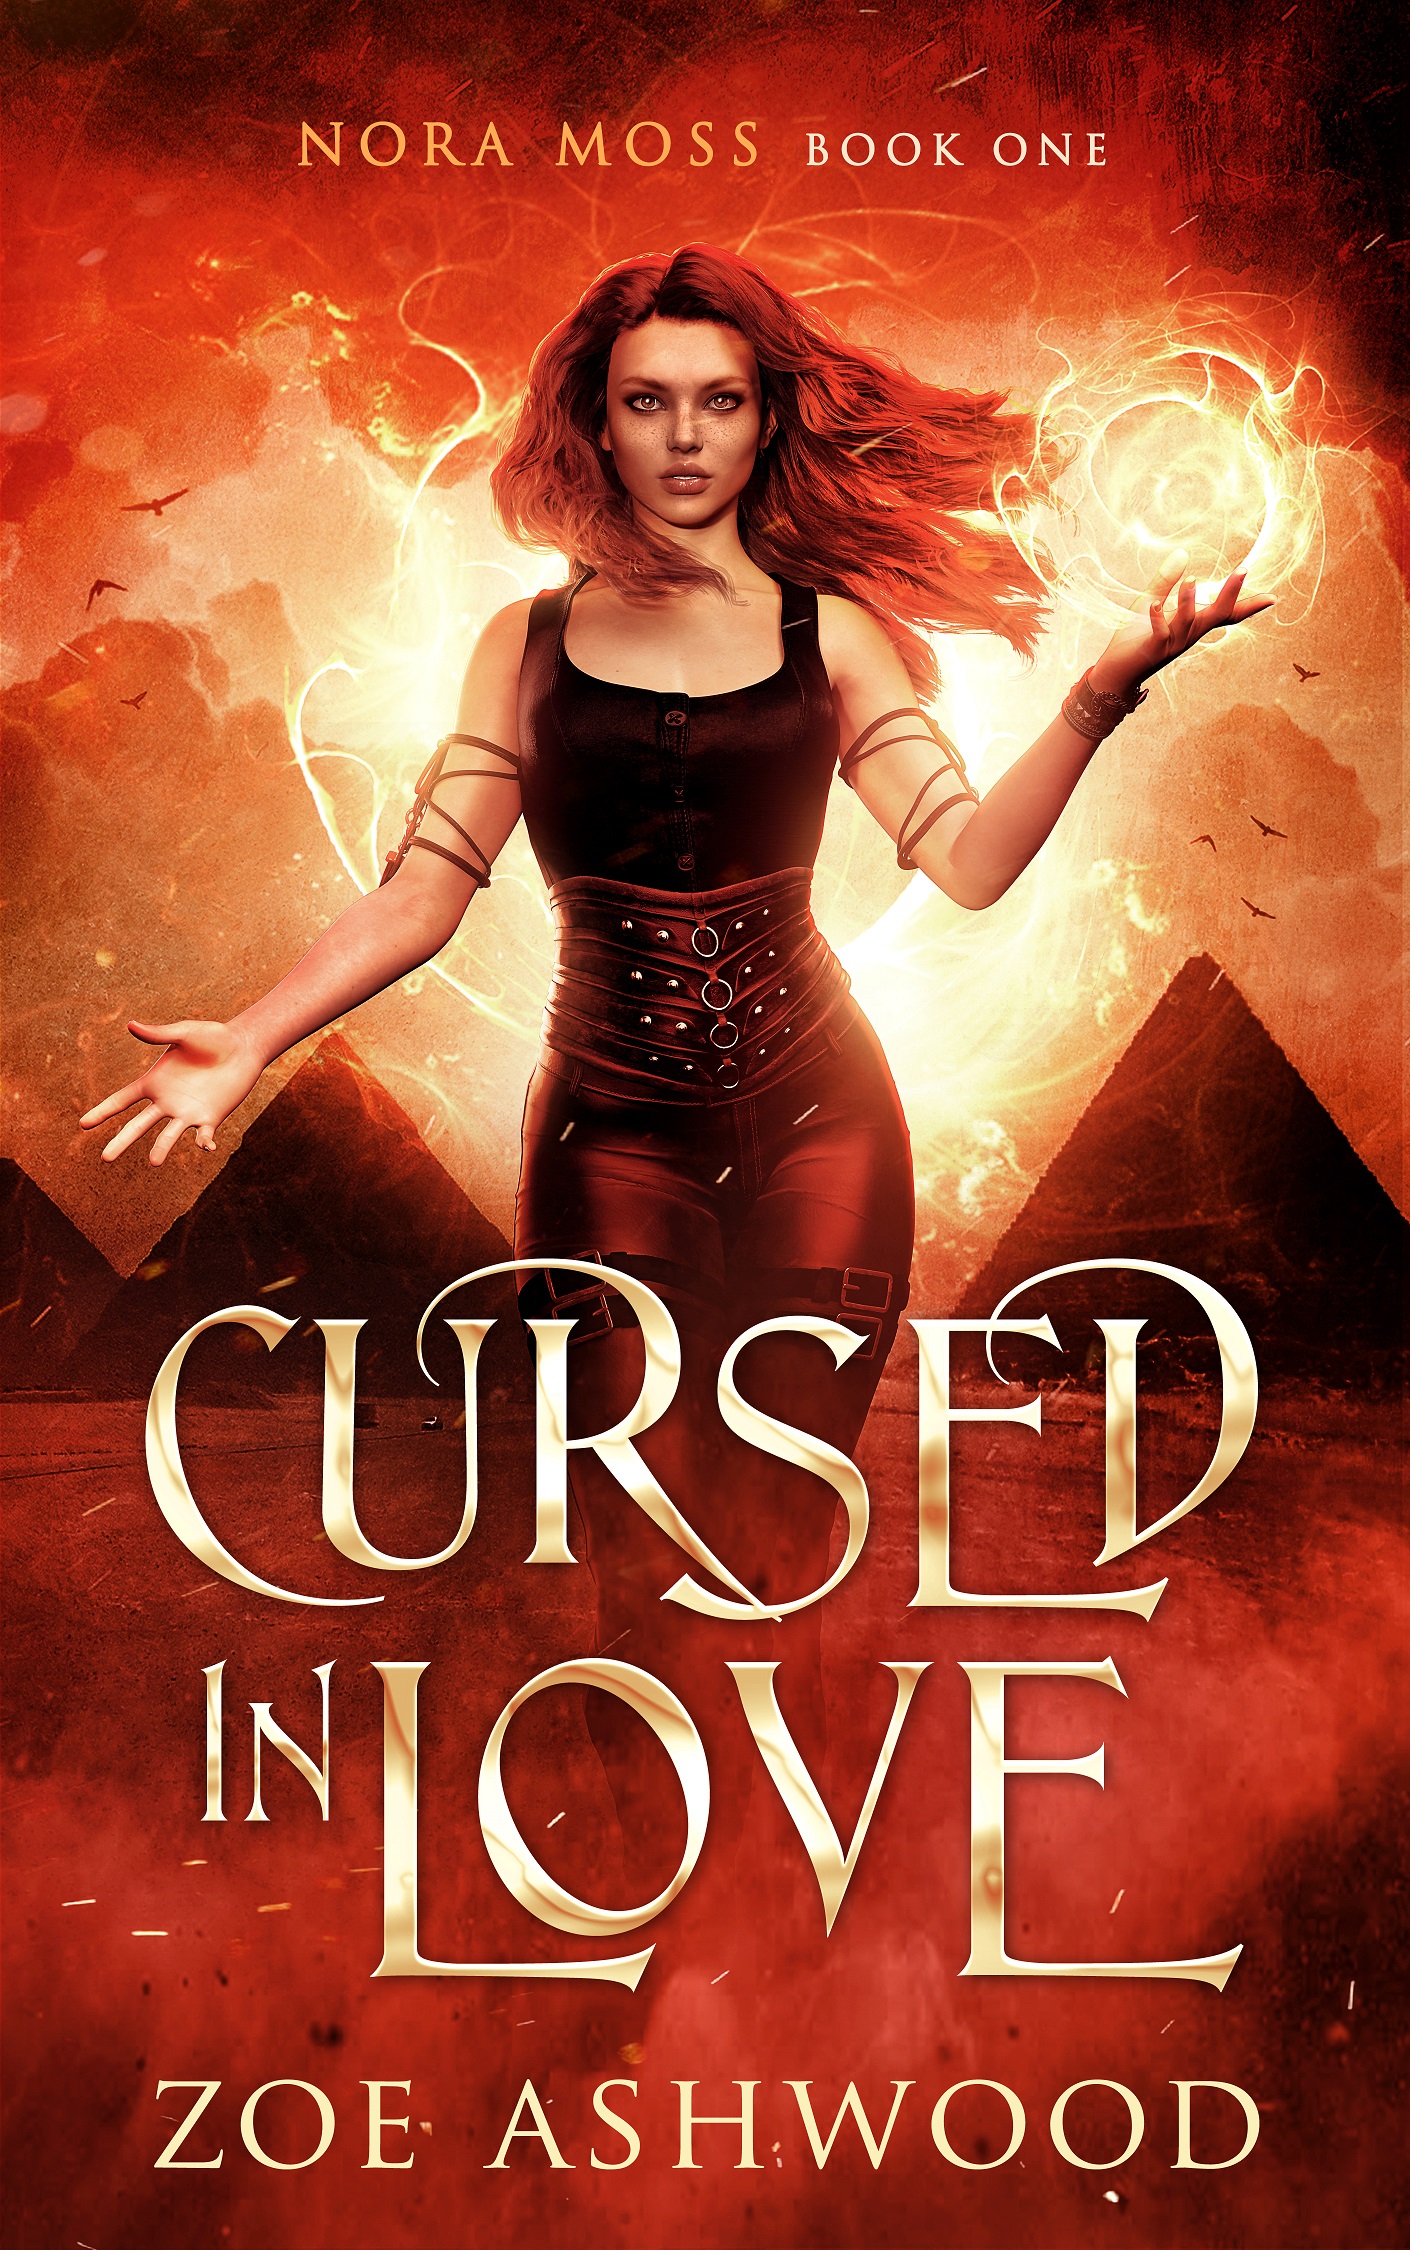 Cursed in Love - Nora Moss #1 - by Zoe Ashwood - a reverse harem paranormal romance